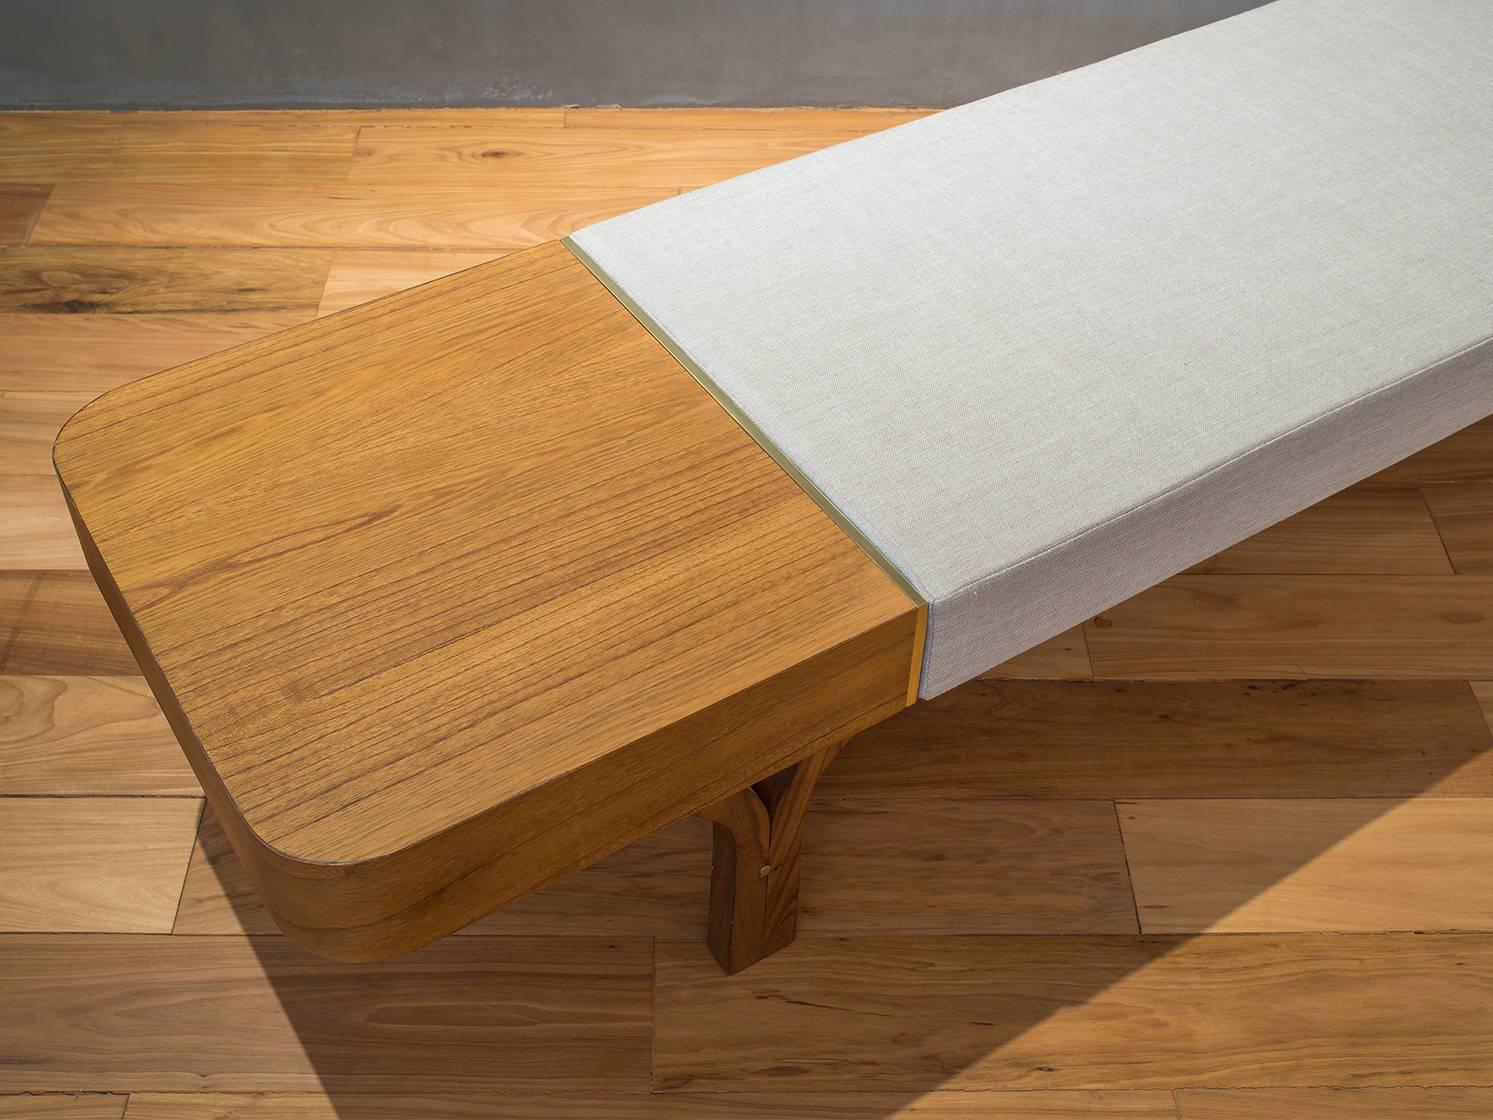 Due Brazilian Contemporary Wood Bench and Table by Lattoog 2